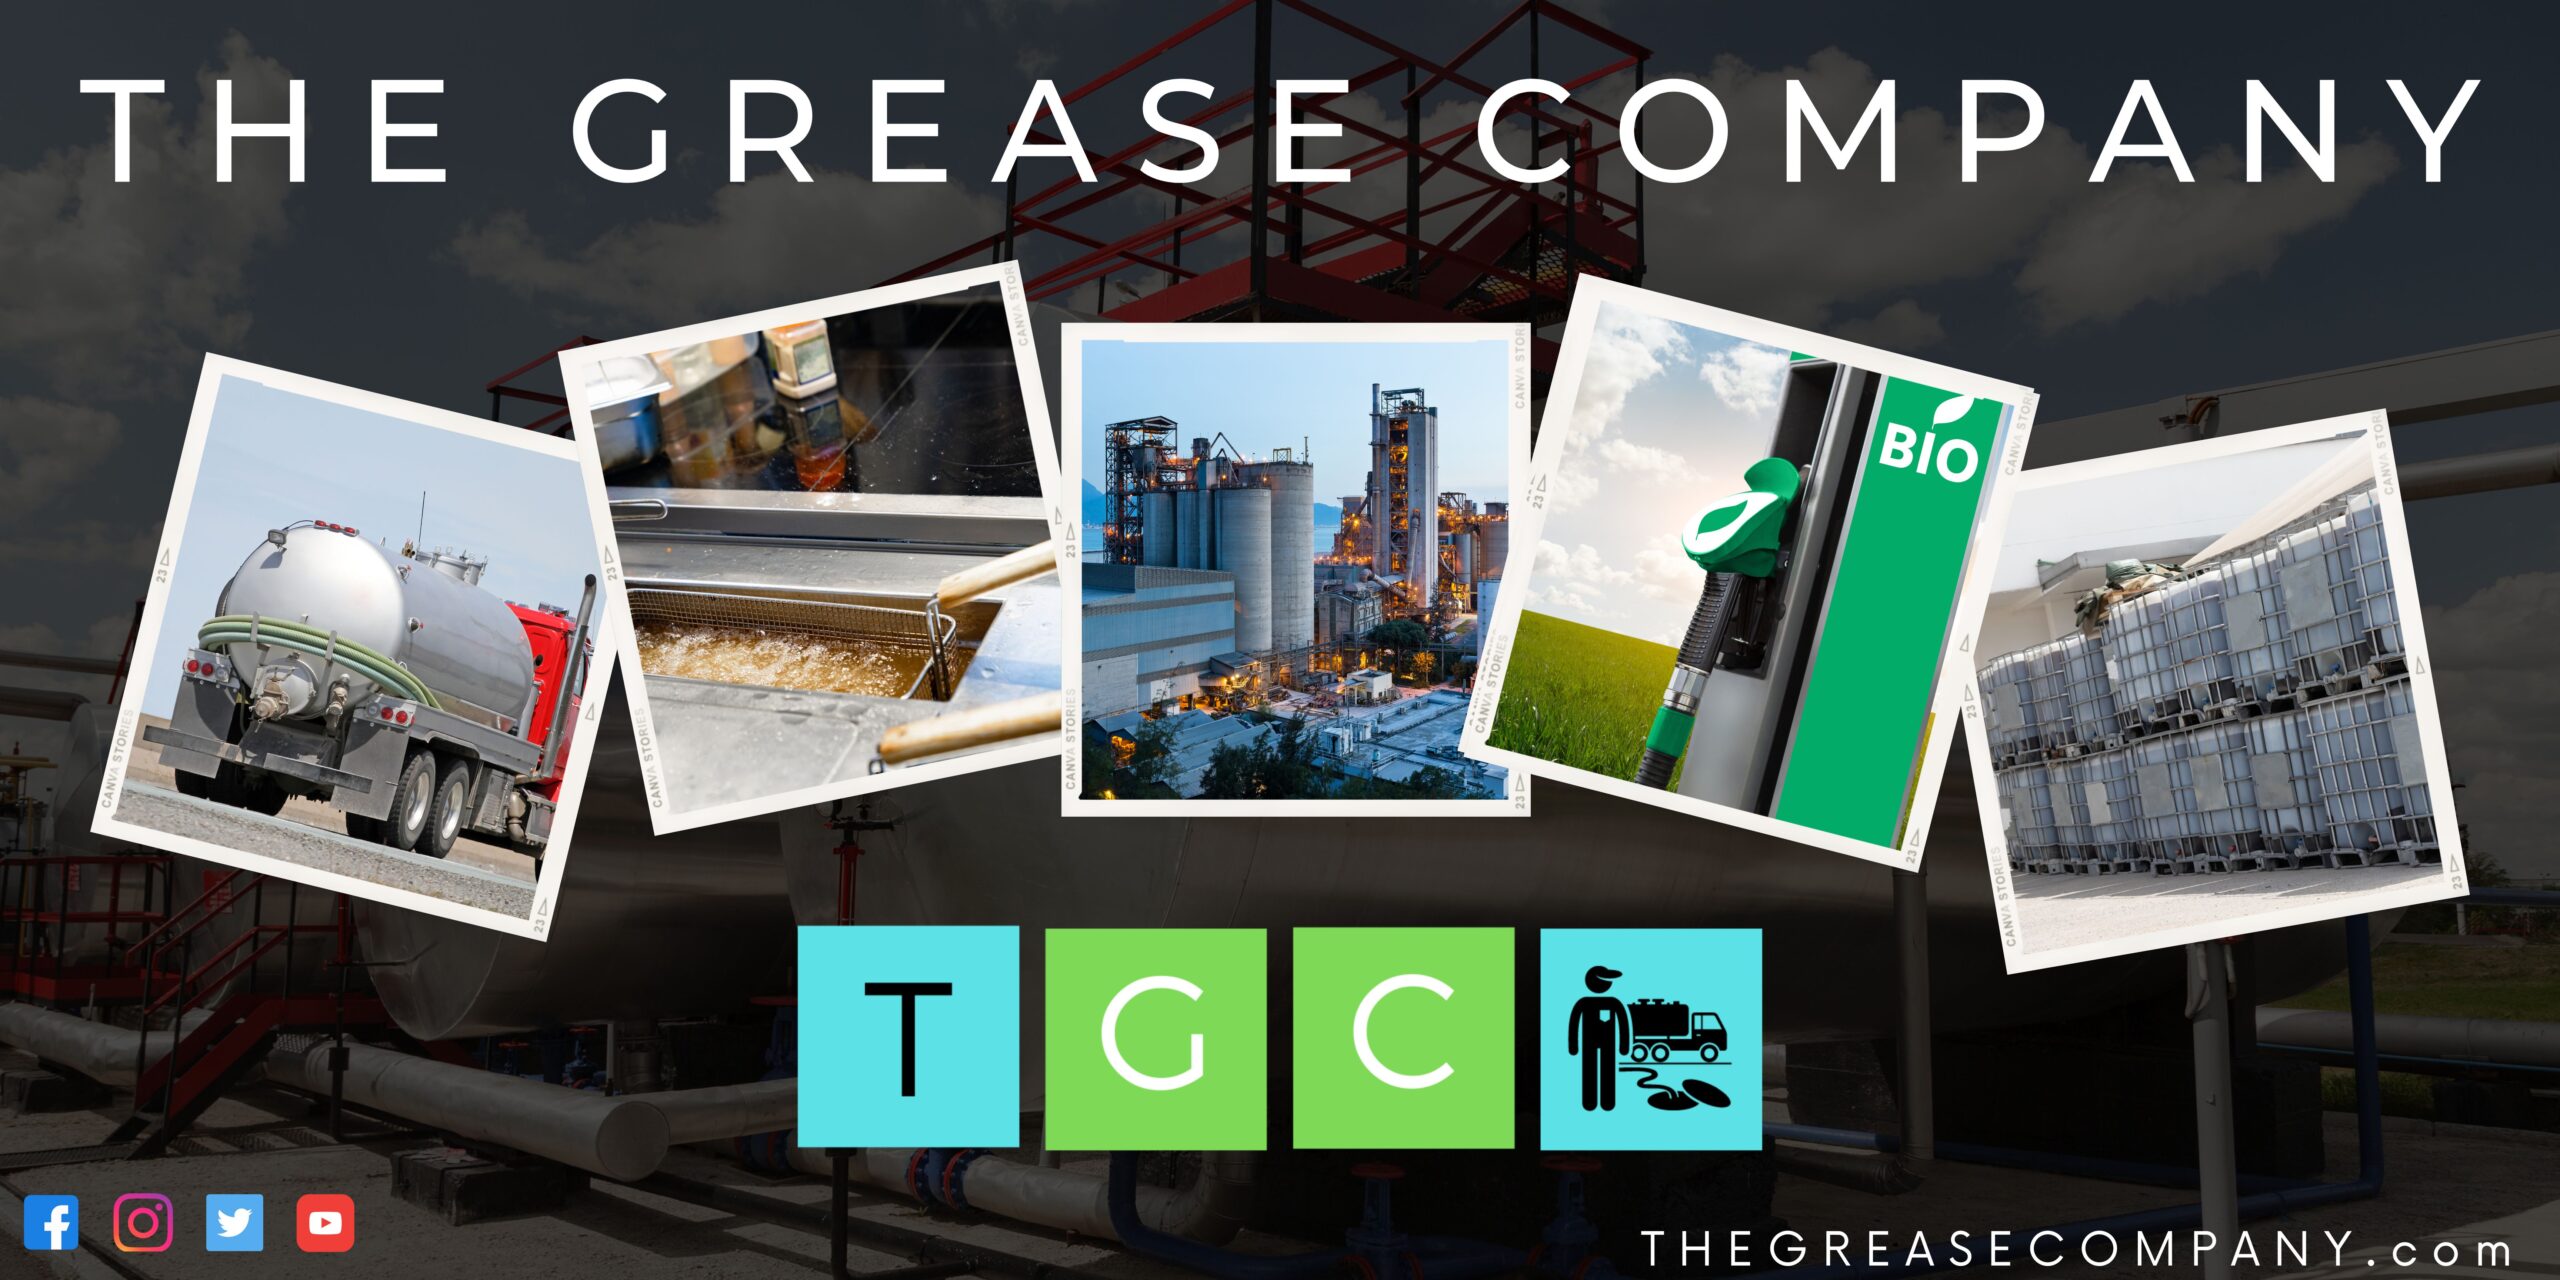 San Diego's Grease Trap Cleaner. Pumping and cleaning commercial grease traps and grease interceptors.